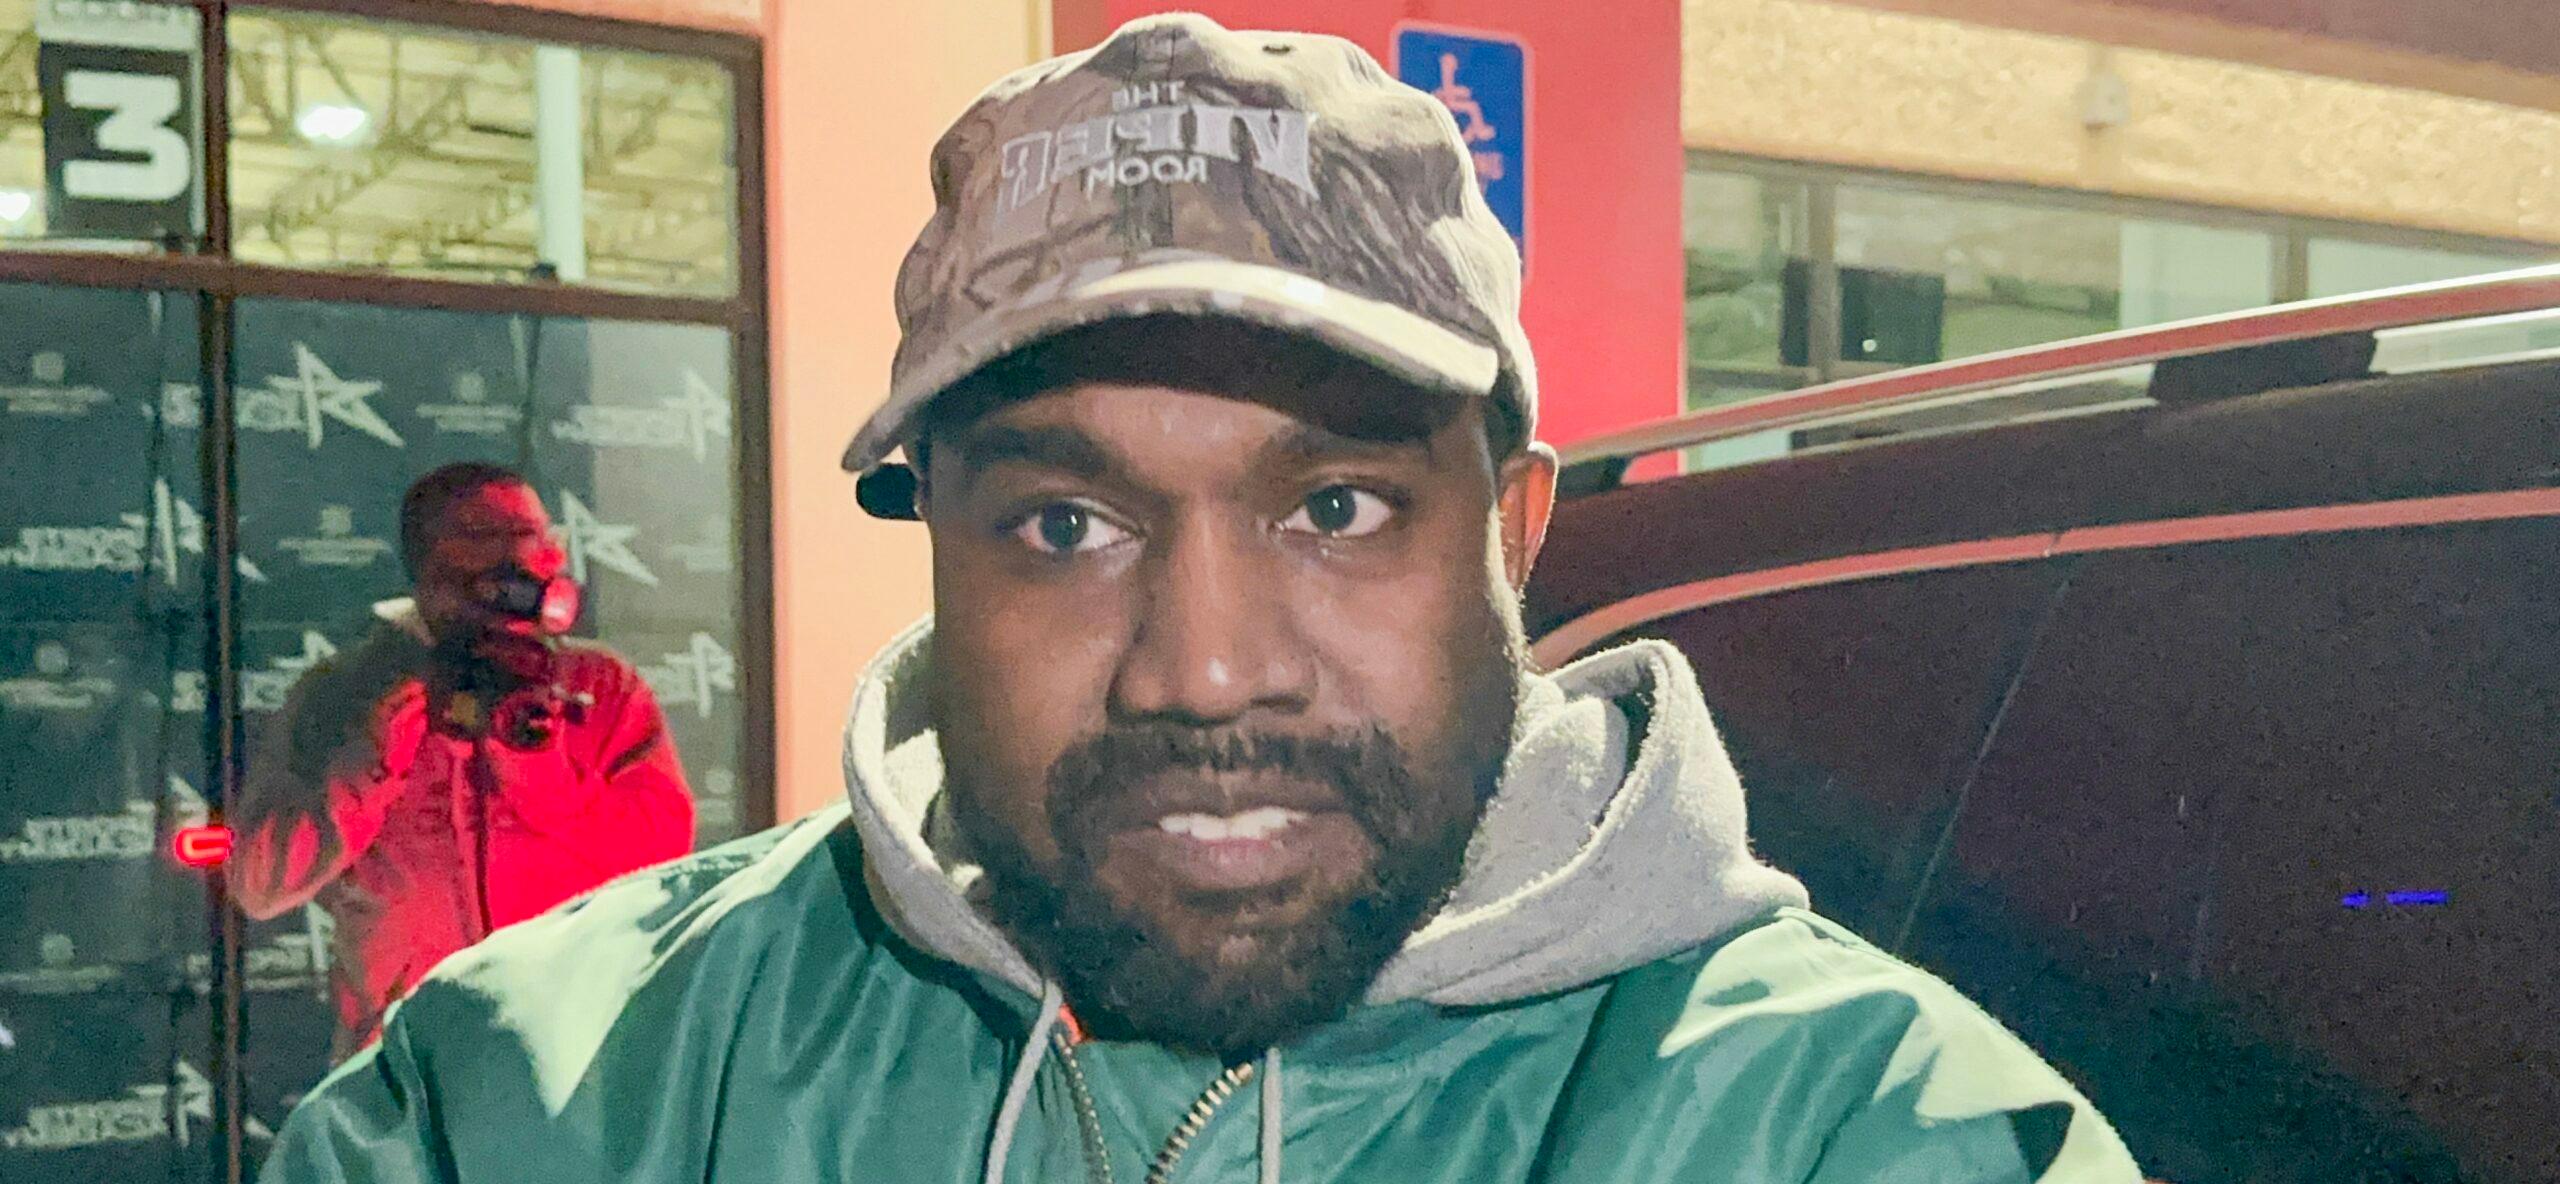 Kanye West’s Instagram Handle Changed To ‘Ye’ After He Threatened To Close His Account